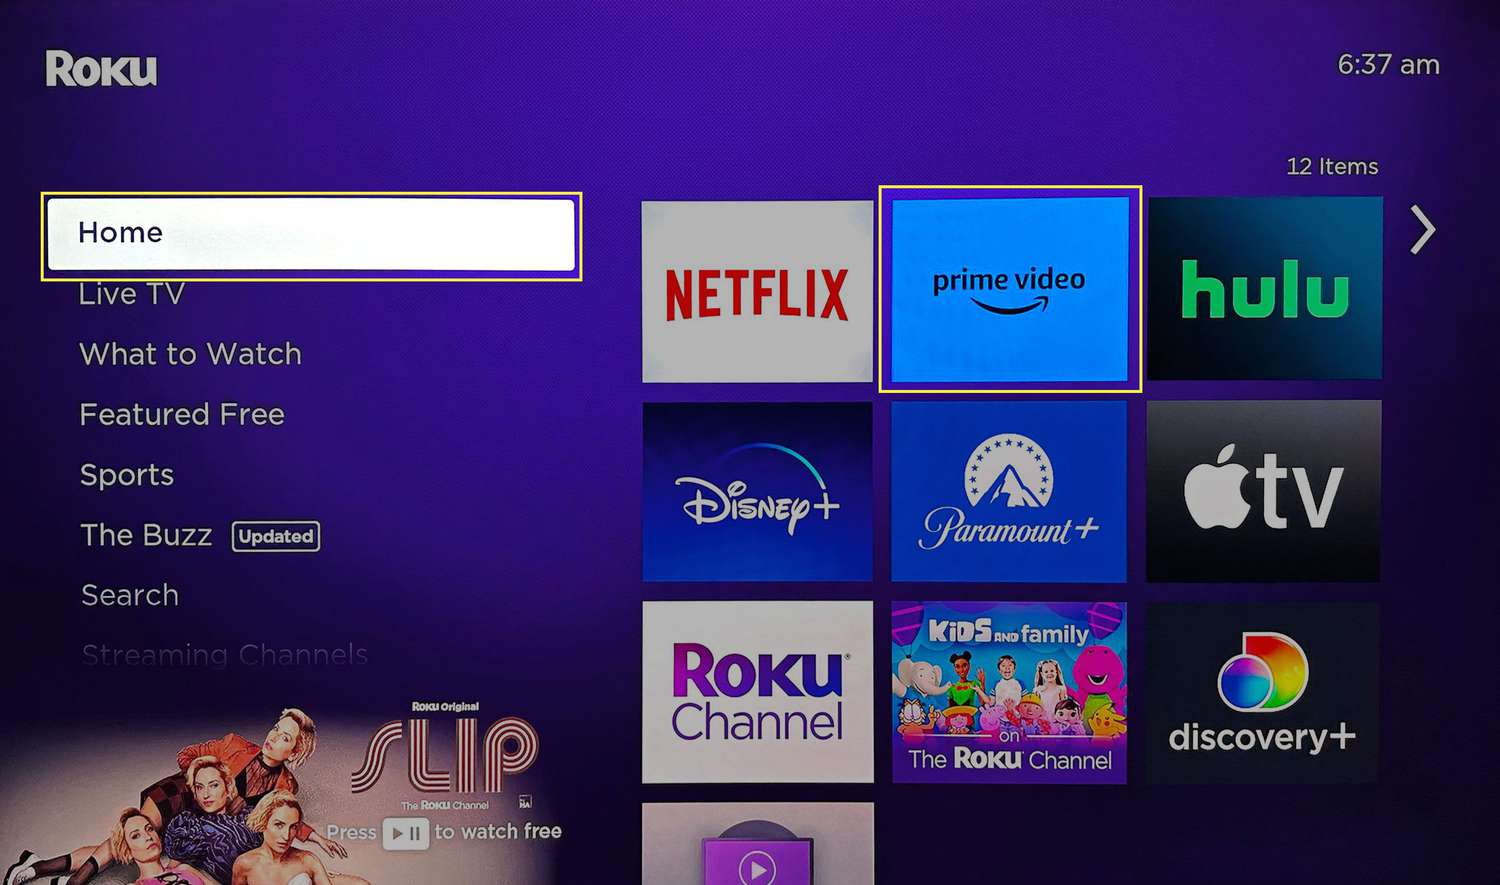 How to Activate Prime Video On Roku?